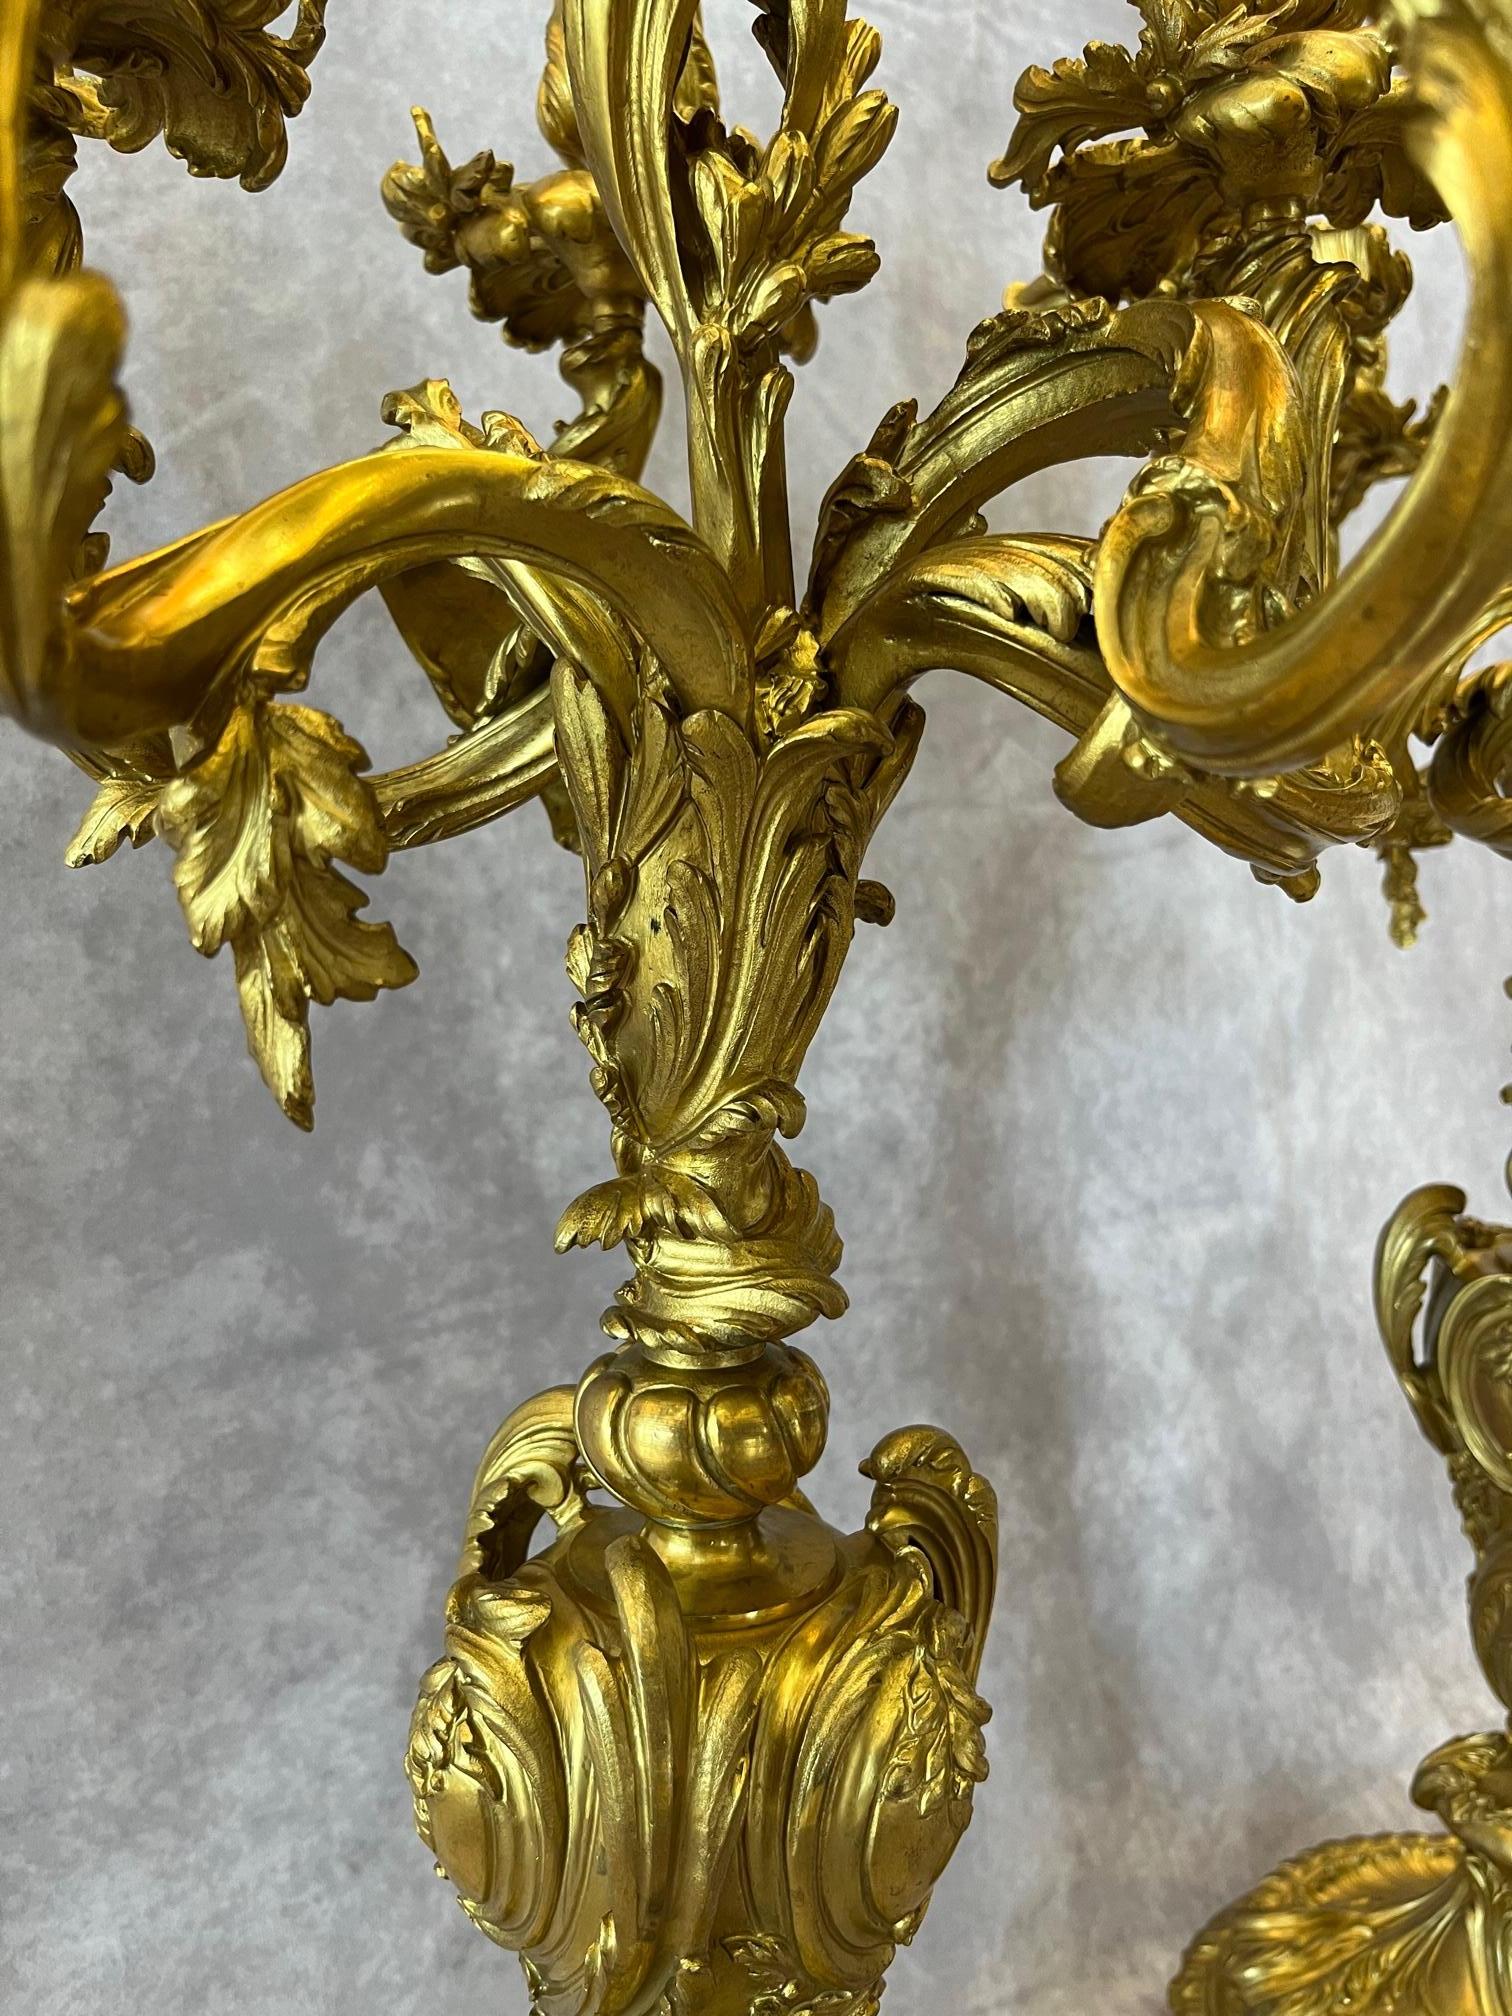 Stunning pair of French 19th Century ormolu Louis XV Candelabras, signed Germain (Jean Baptiste Germain 1843-1909 French sculptor)
Each uniquely designed five arm candelabra, unique and elegantly scrolled designs with large acanthus leaves and